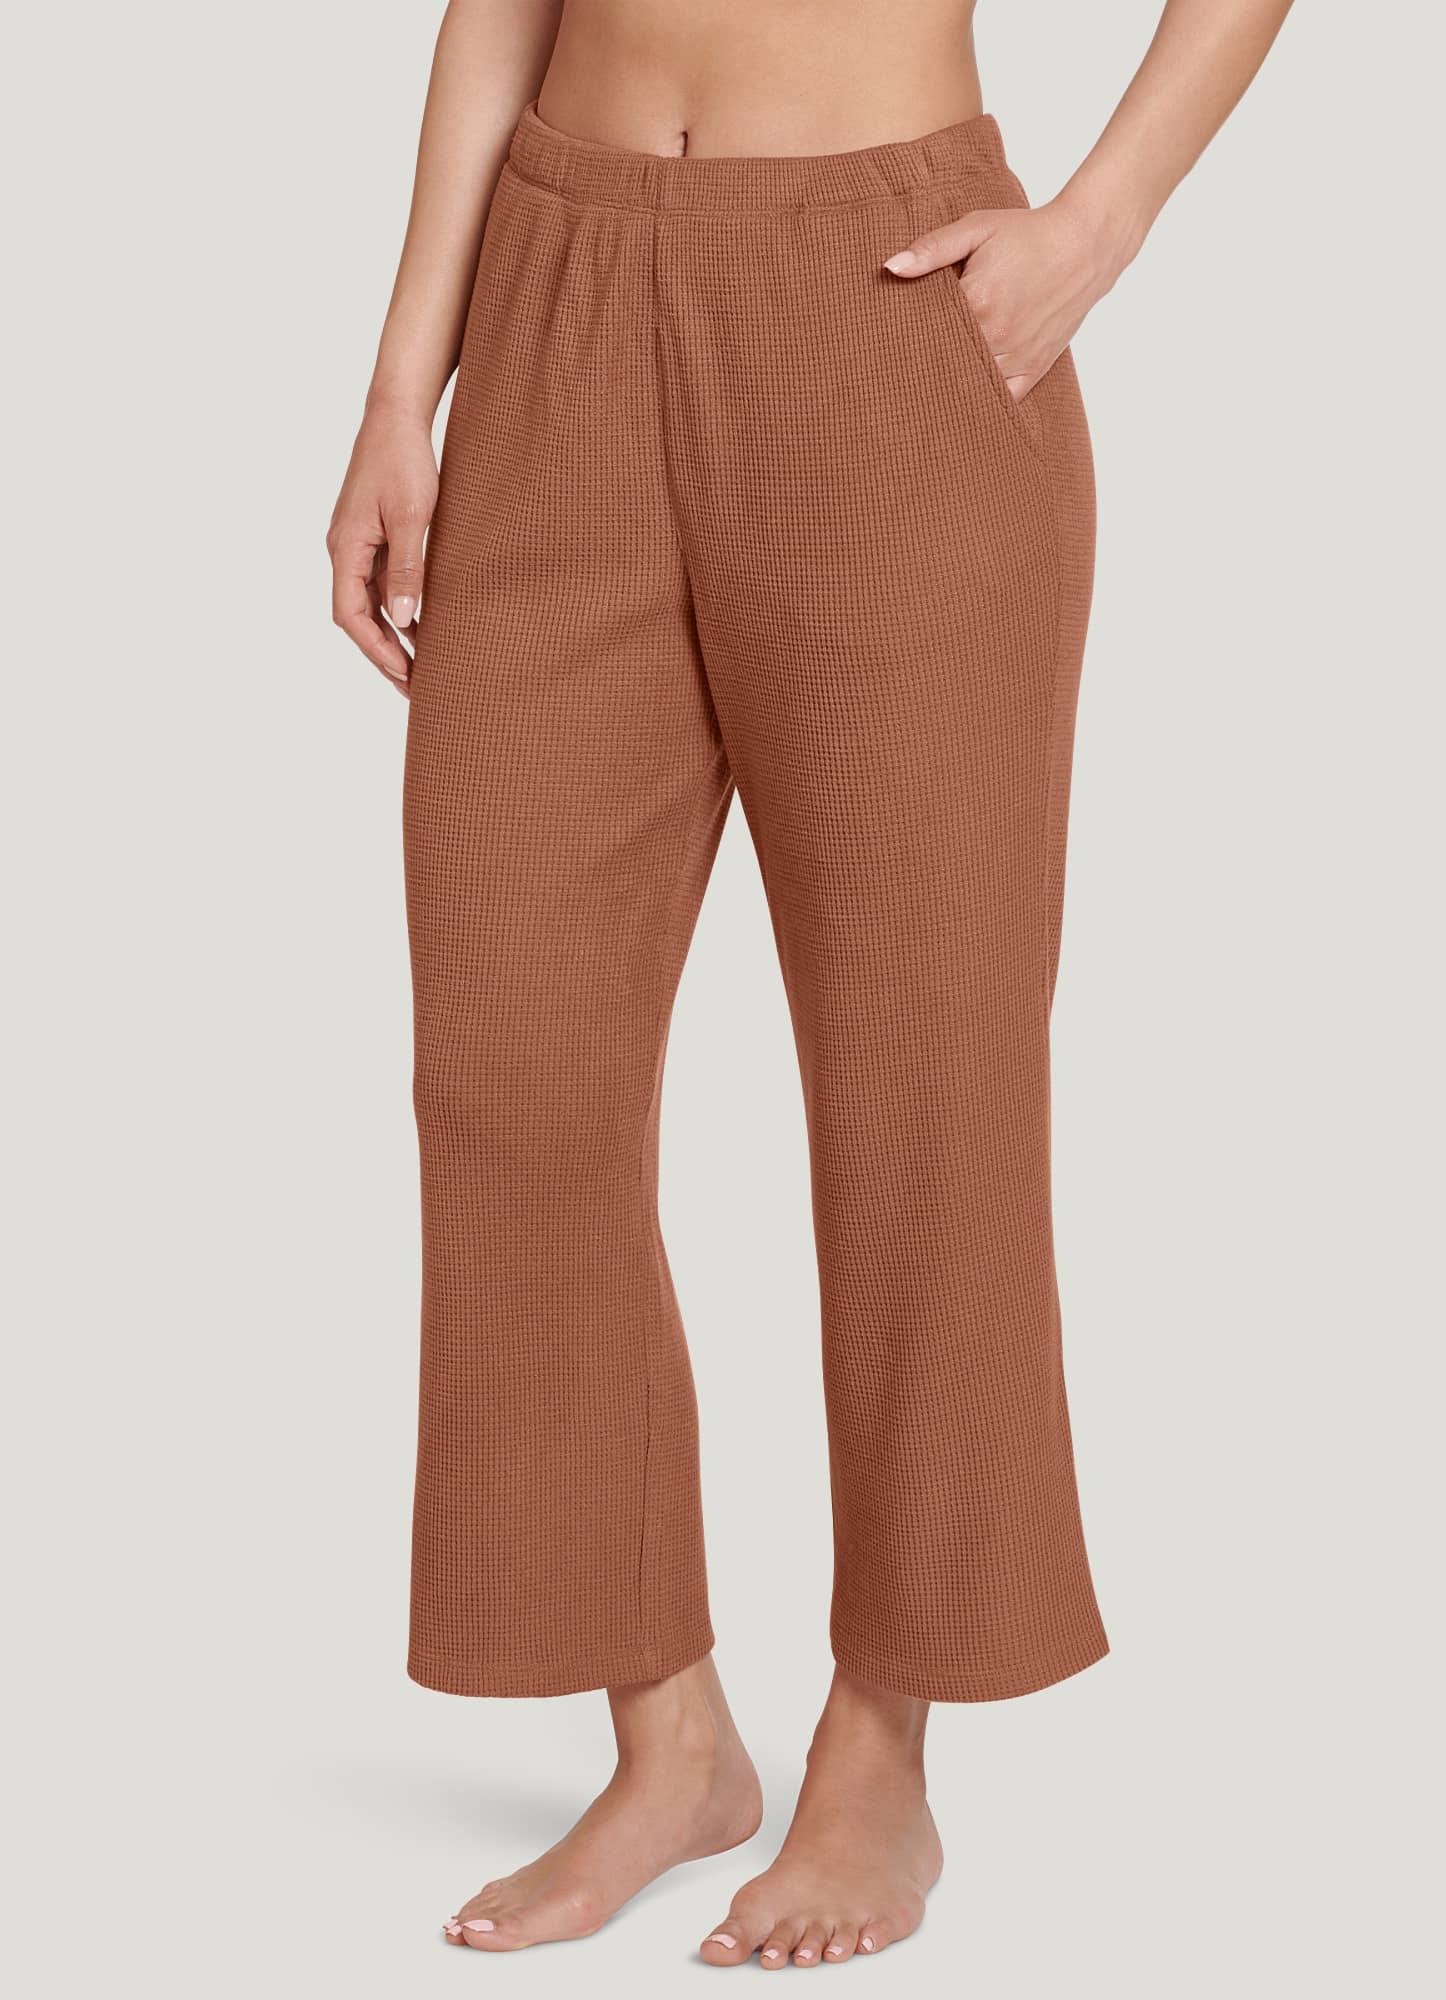 Buy Jockey 1302 Women's Cotton Elastane Trackpants With Convenient Side  Pockets - Rose online